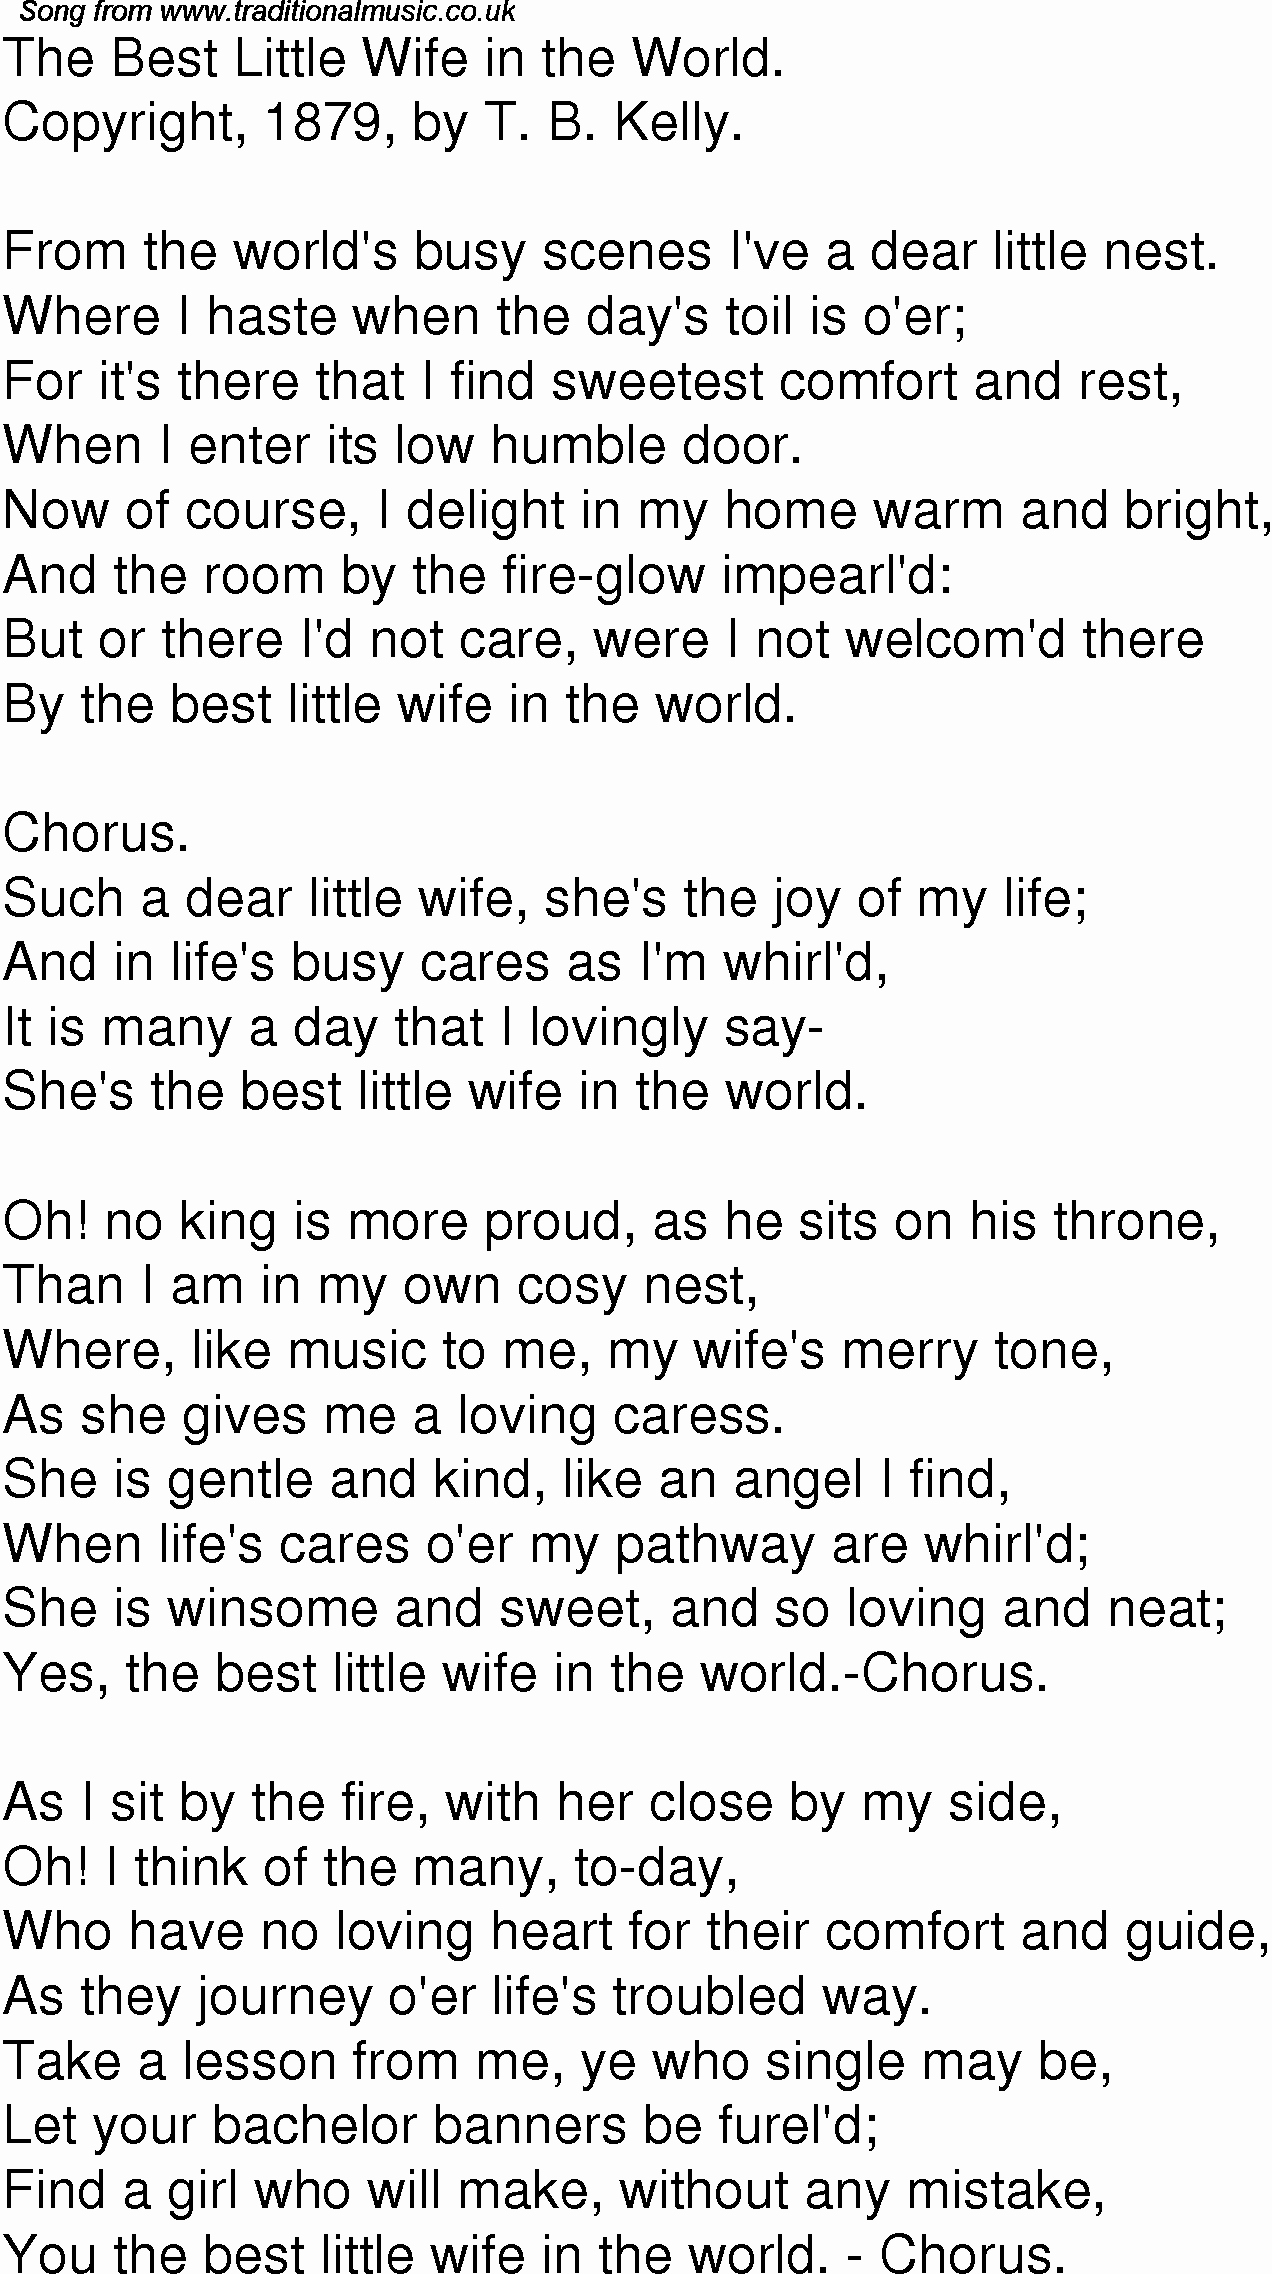 Best Wife In the World Award Unique Old Time song Lyrics for 05 the Best Little Wife In the World